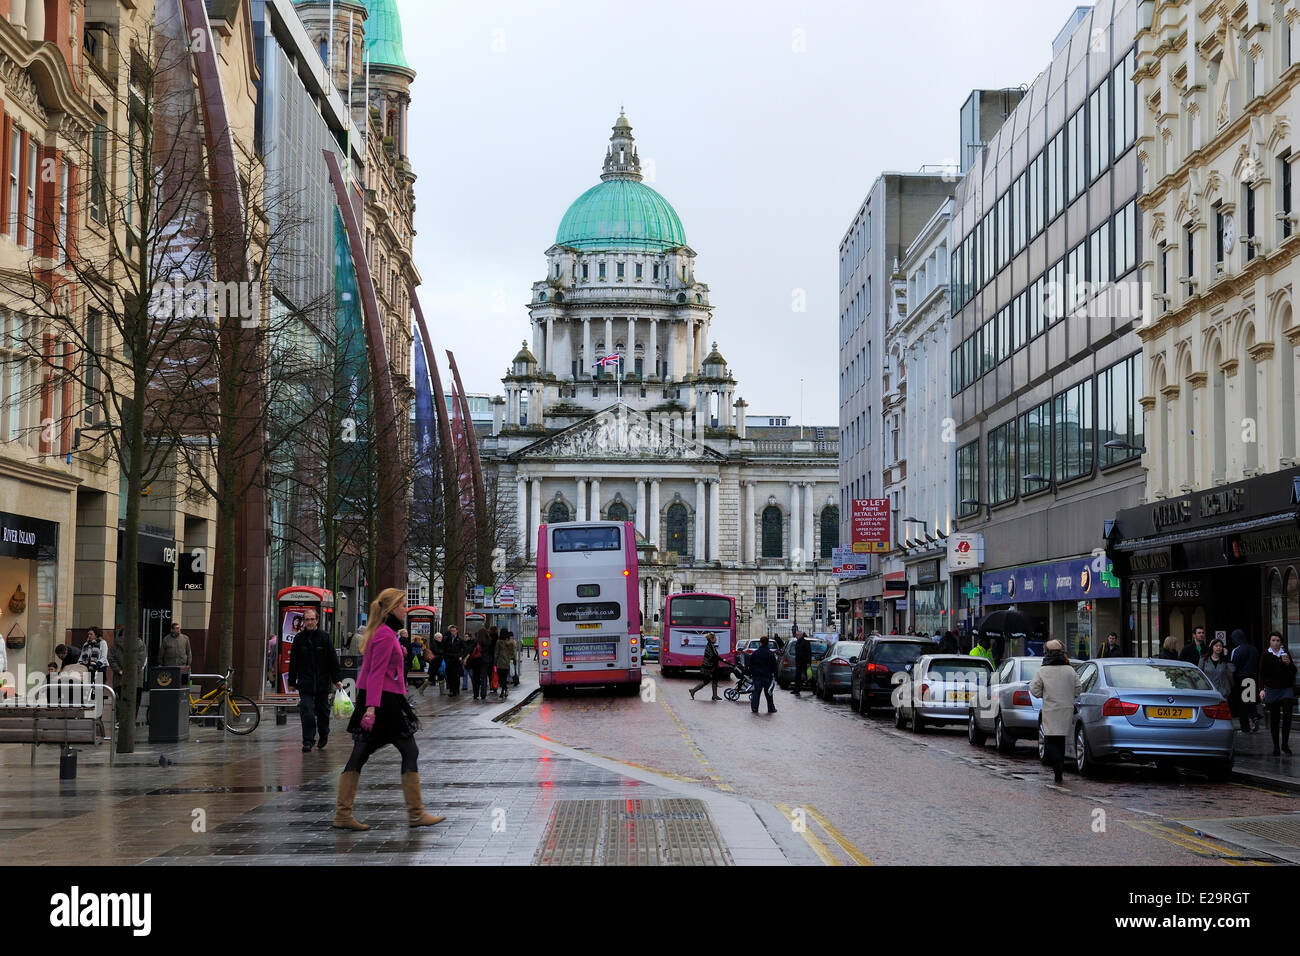 United Kingdom, Northern Ireland, Belfast, the City Hall on Donegall square Stock Photo